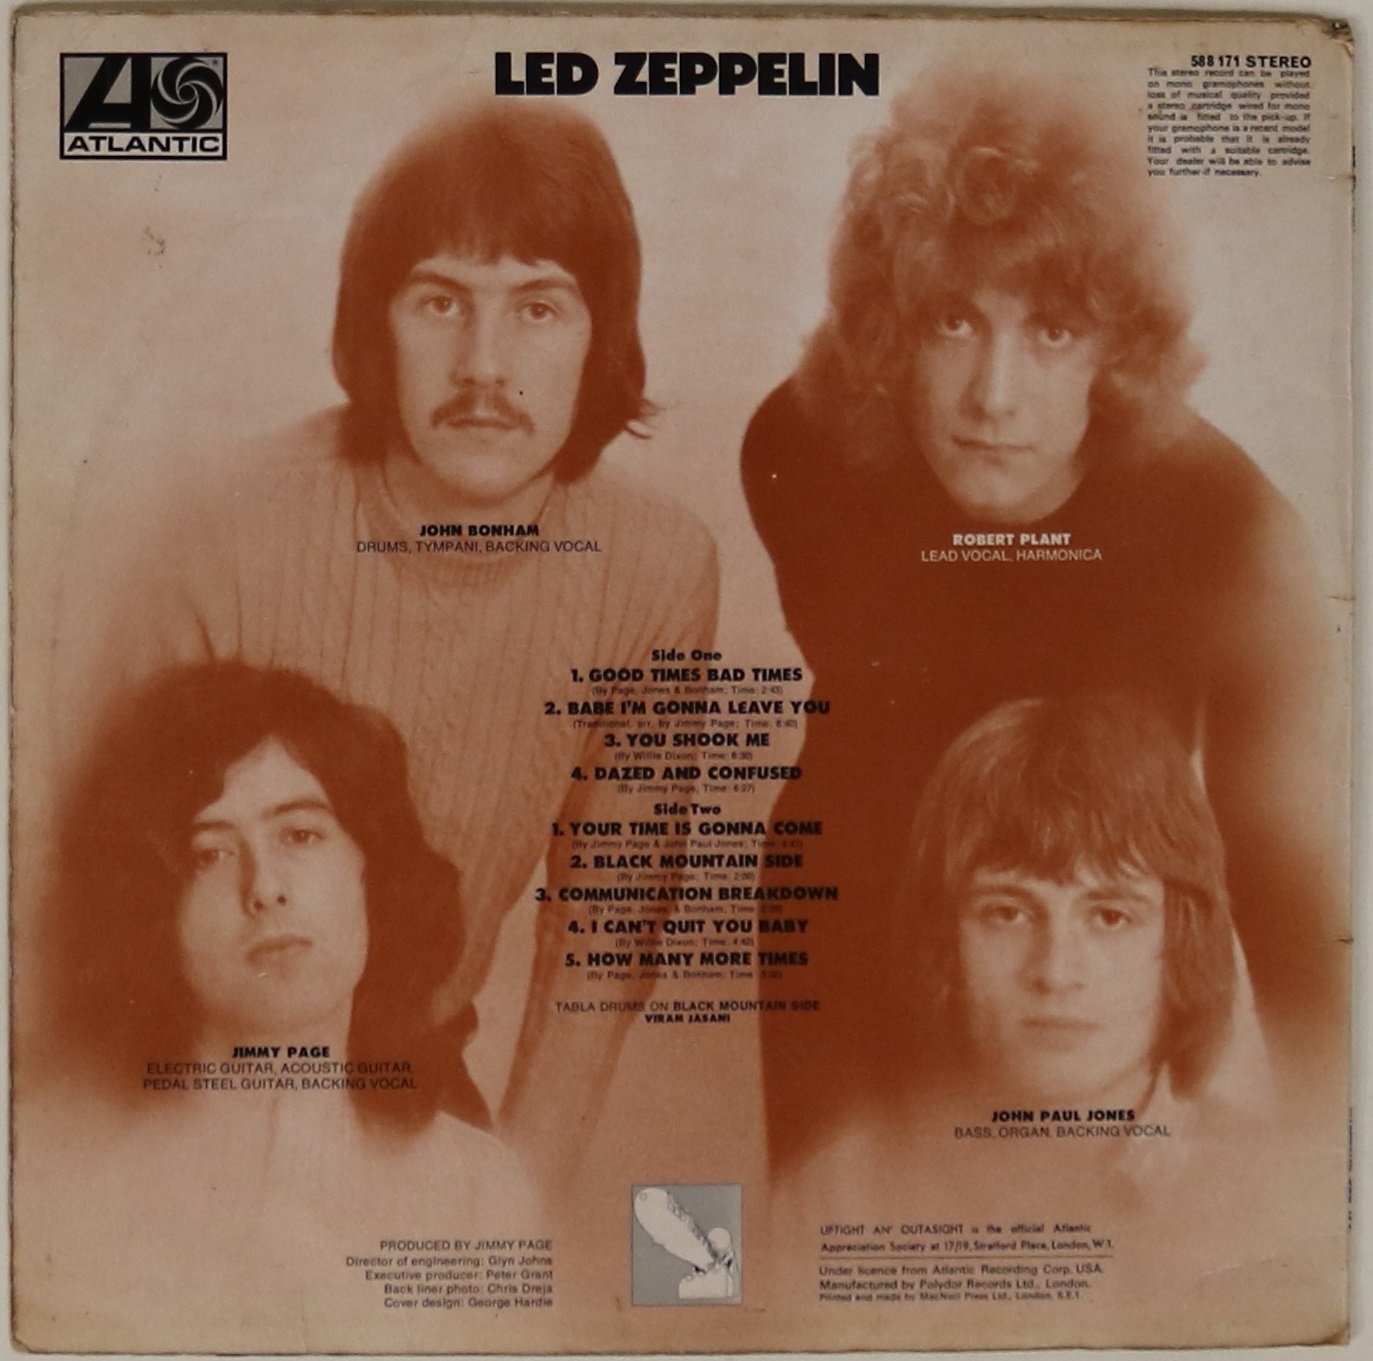 LED ZEPPELIN - SELF TITLED - 1st UK pressing of the band's hugely influential debut album - this - Image 2 of 4